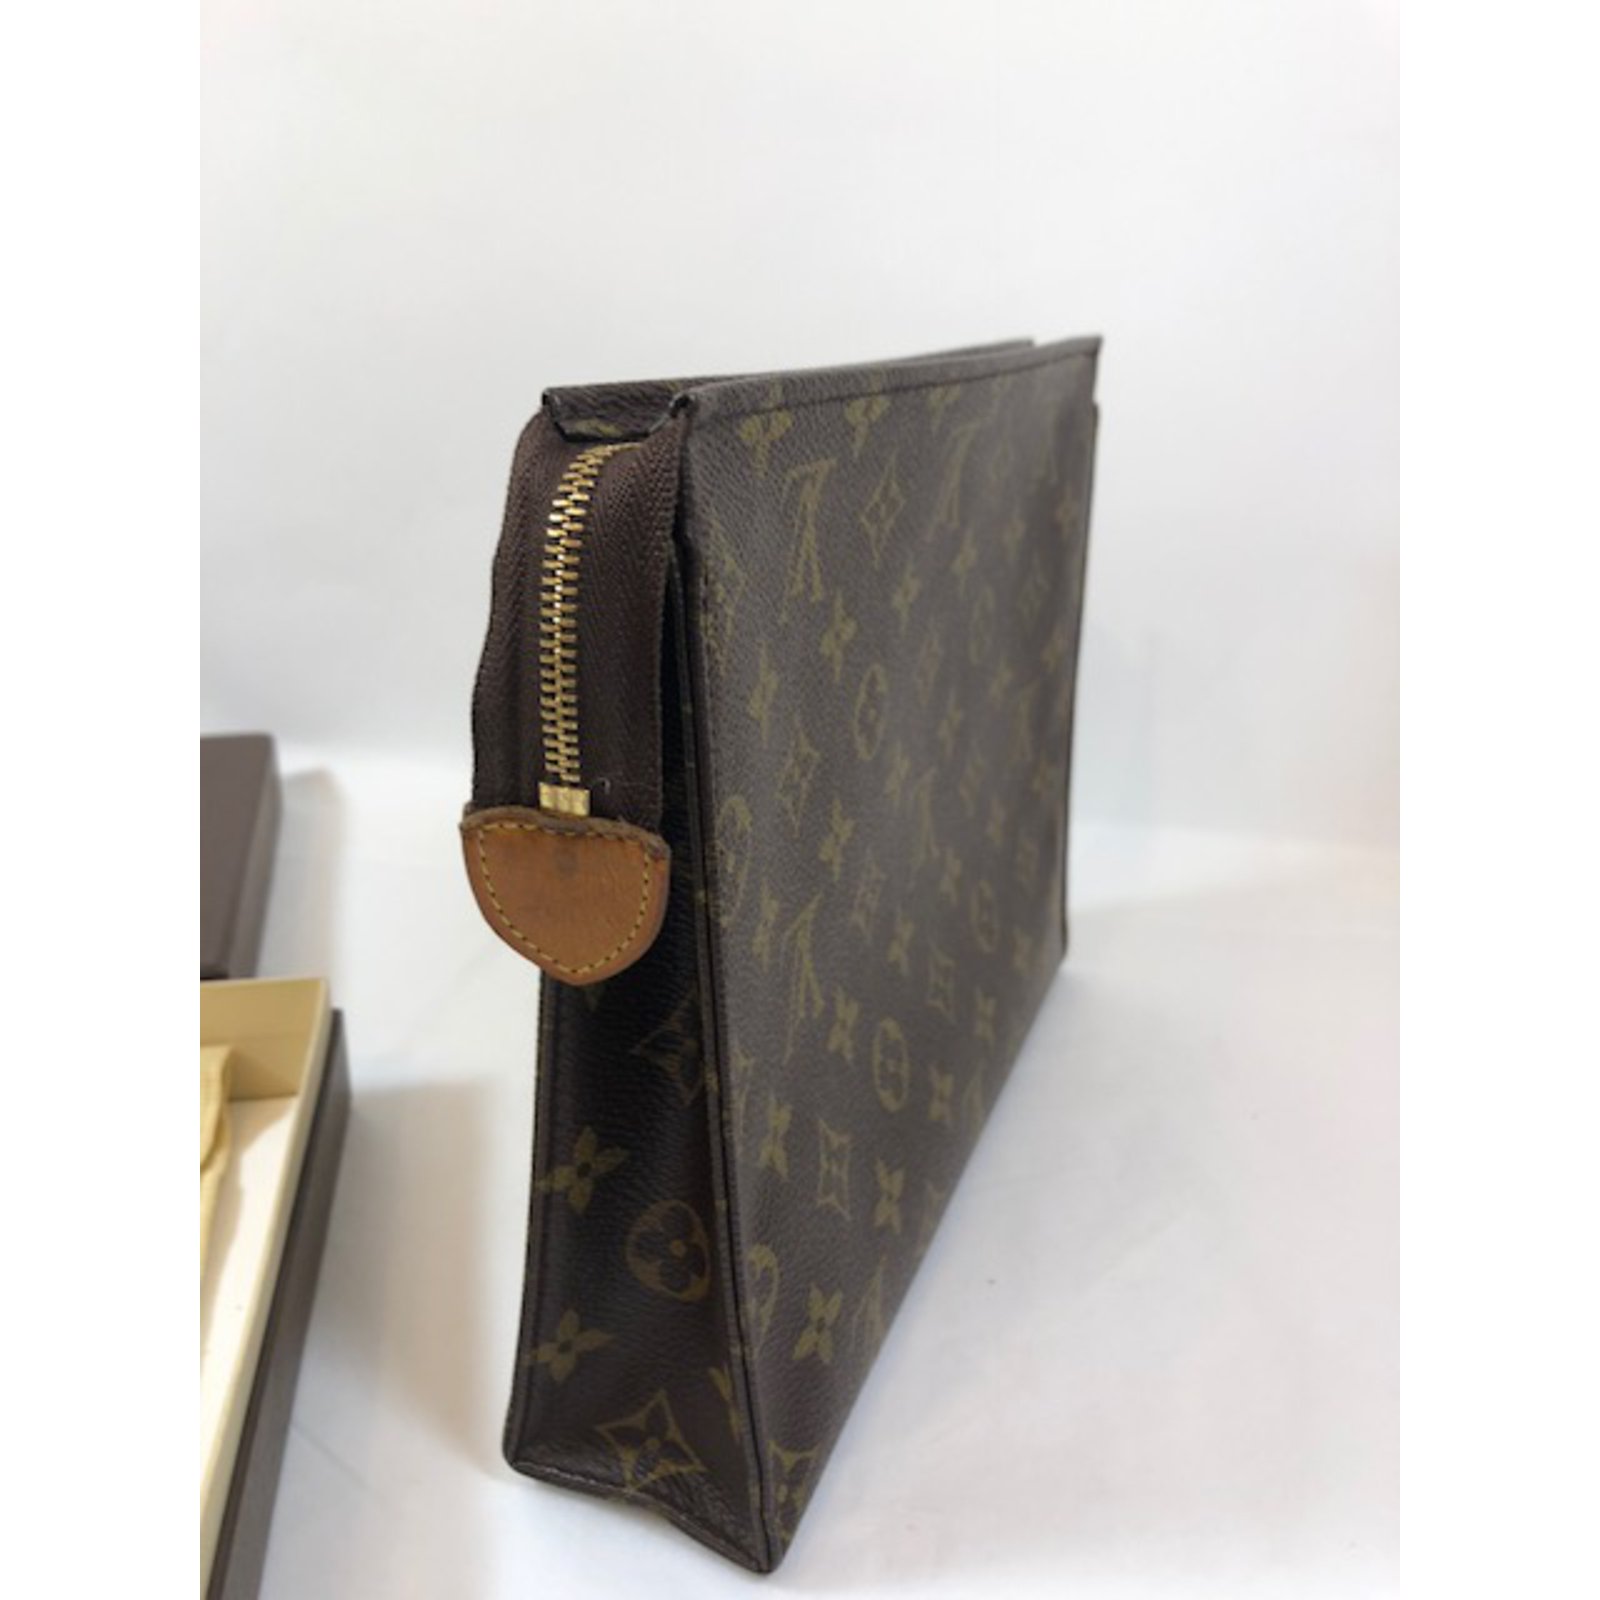 Bag in Monogram canvas, natural leather, gold-plated br…